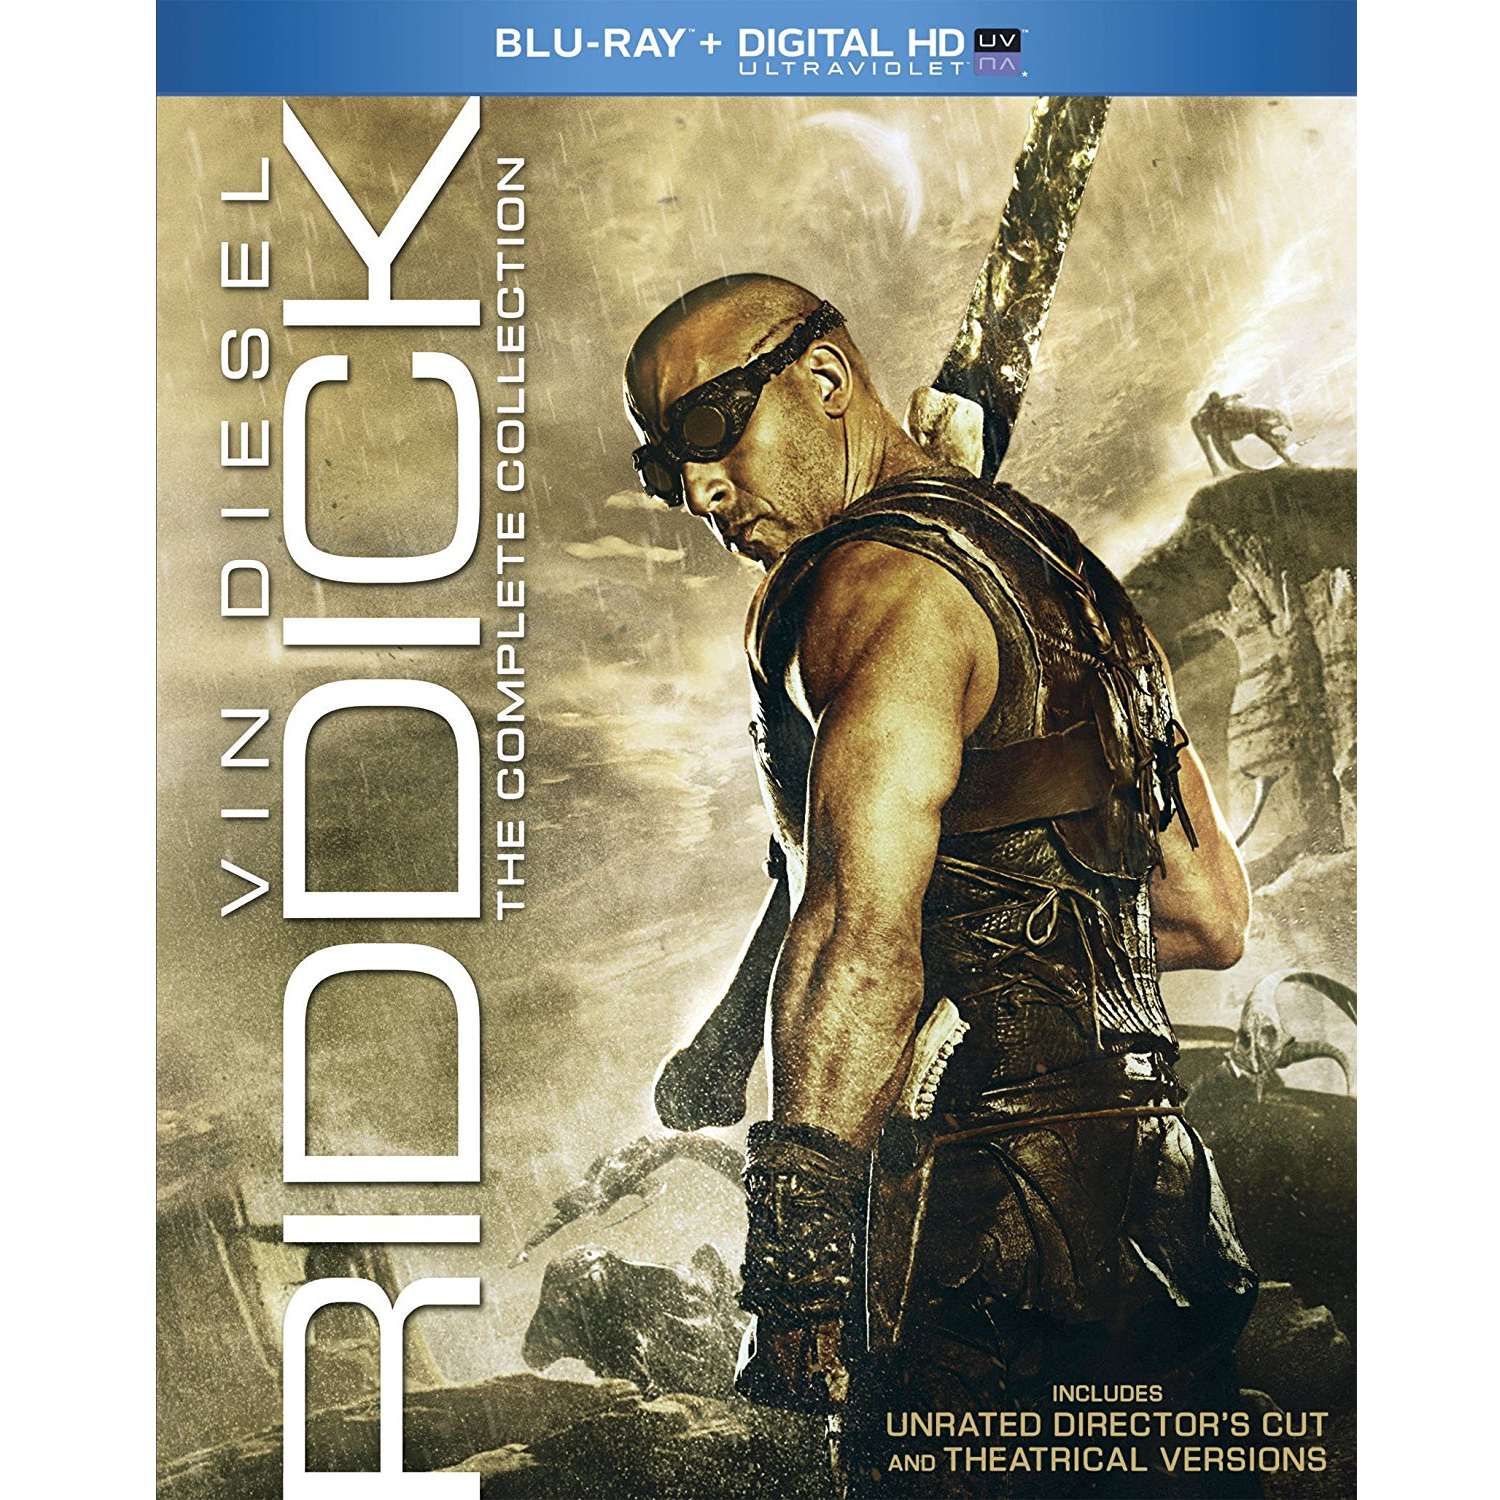 Riddick: The Complete Collection on Blu-ray Only $13.99!